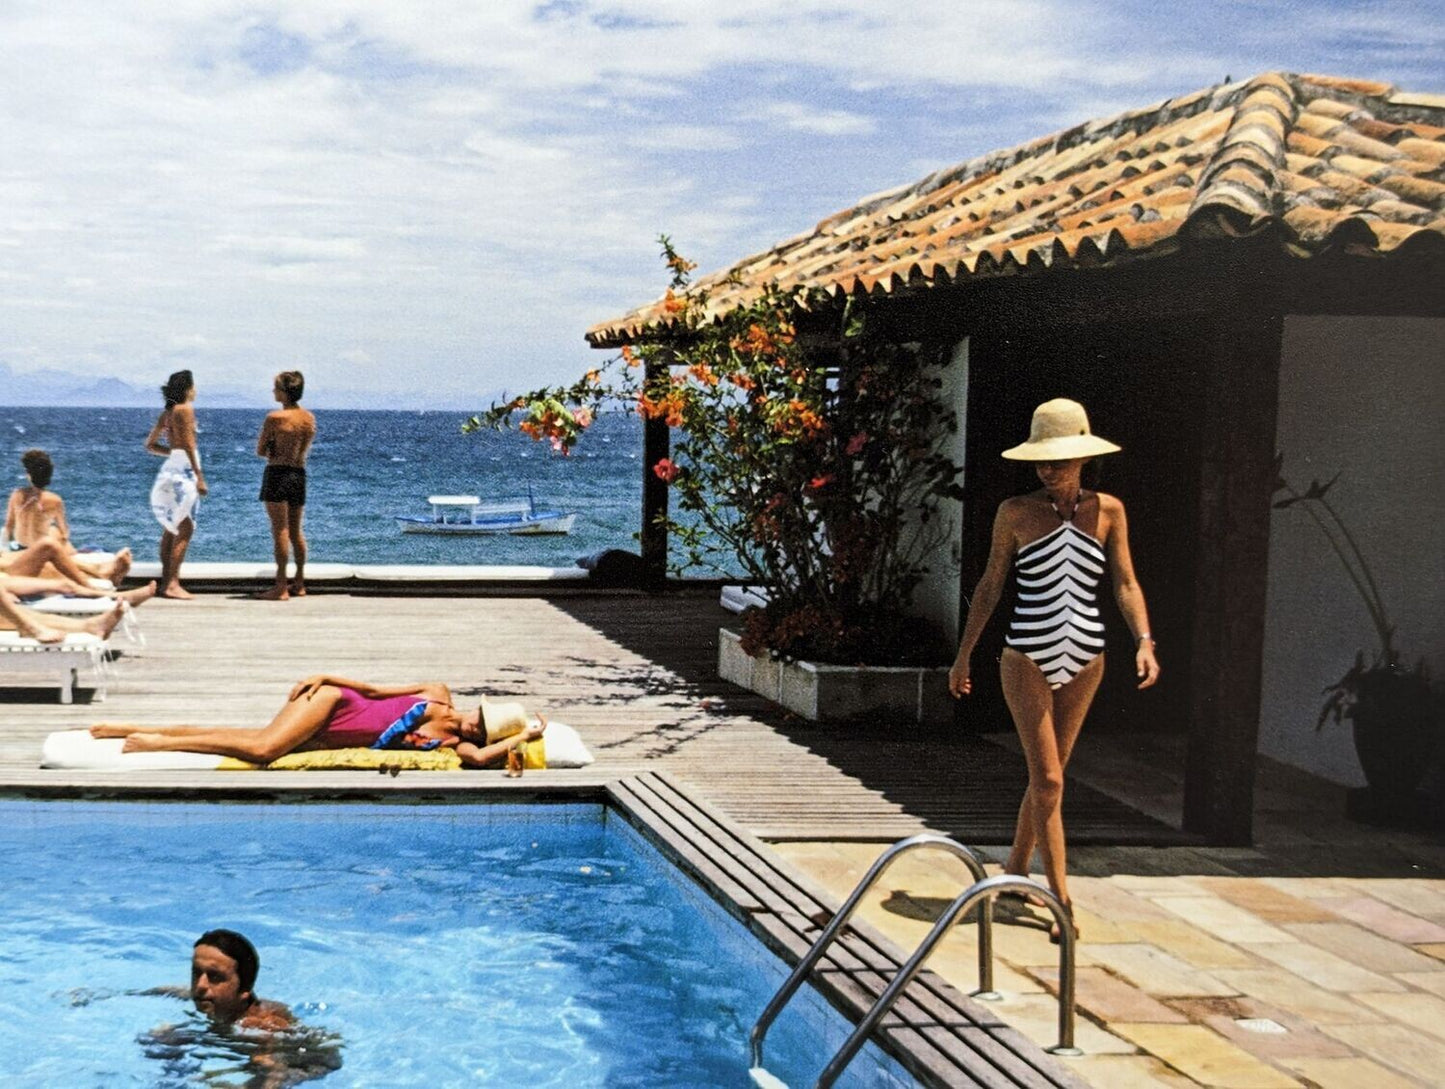 Slim Aarons - Buzios - Out of stock edition